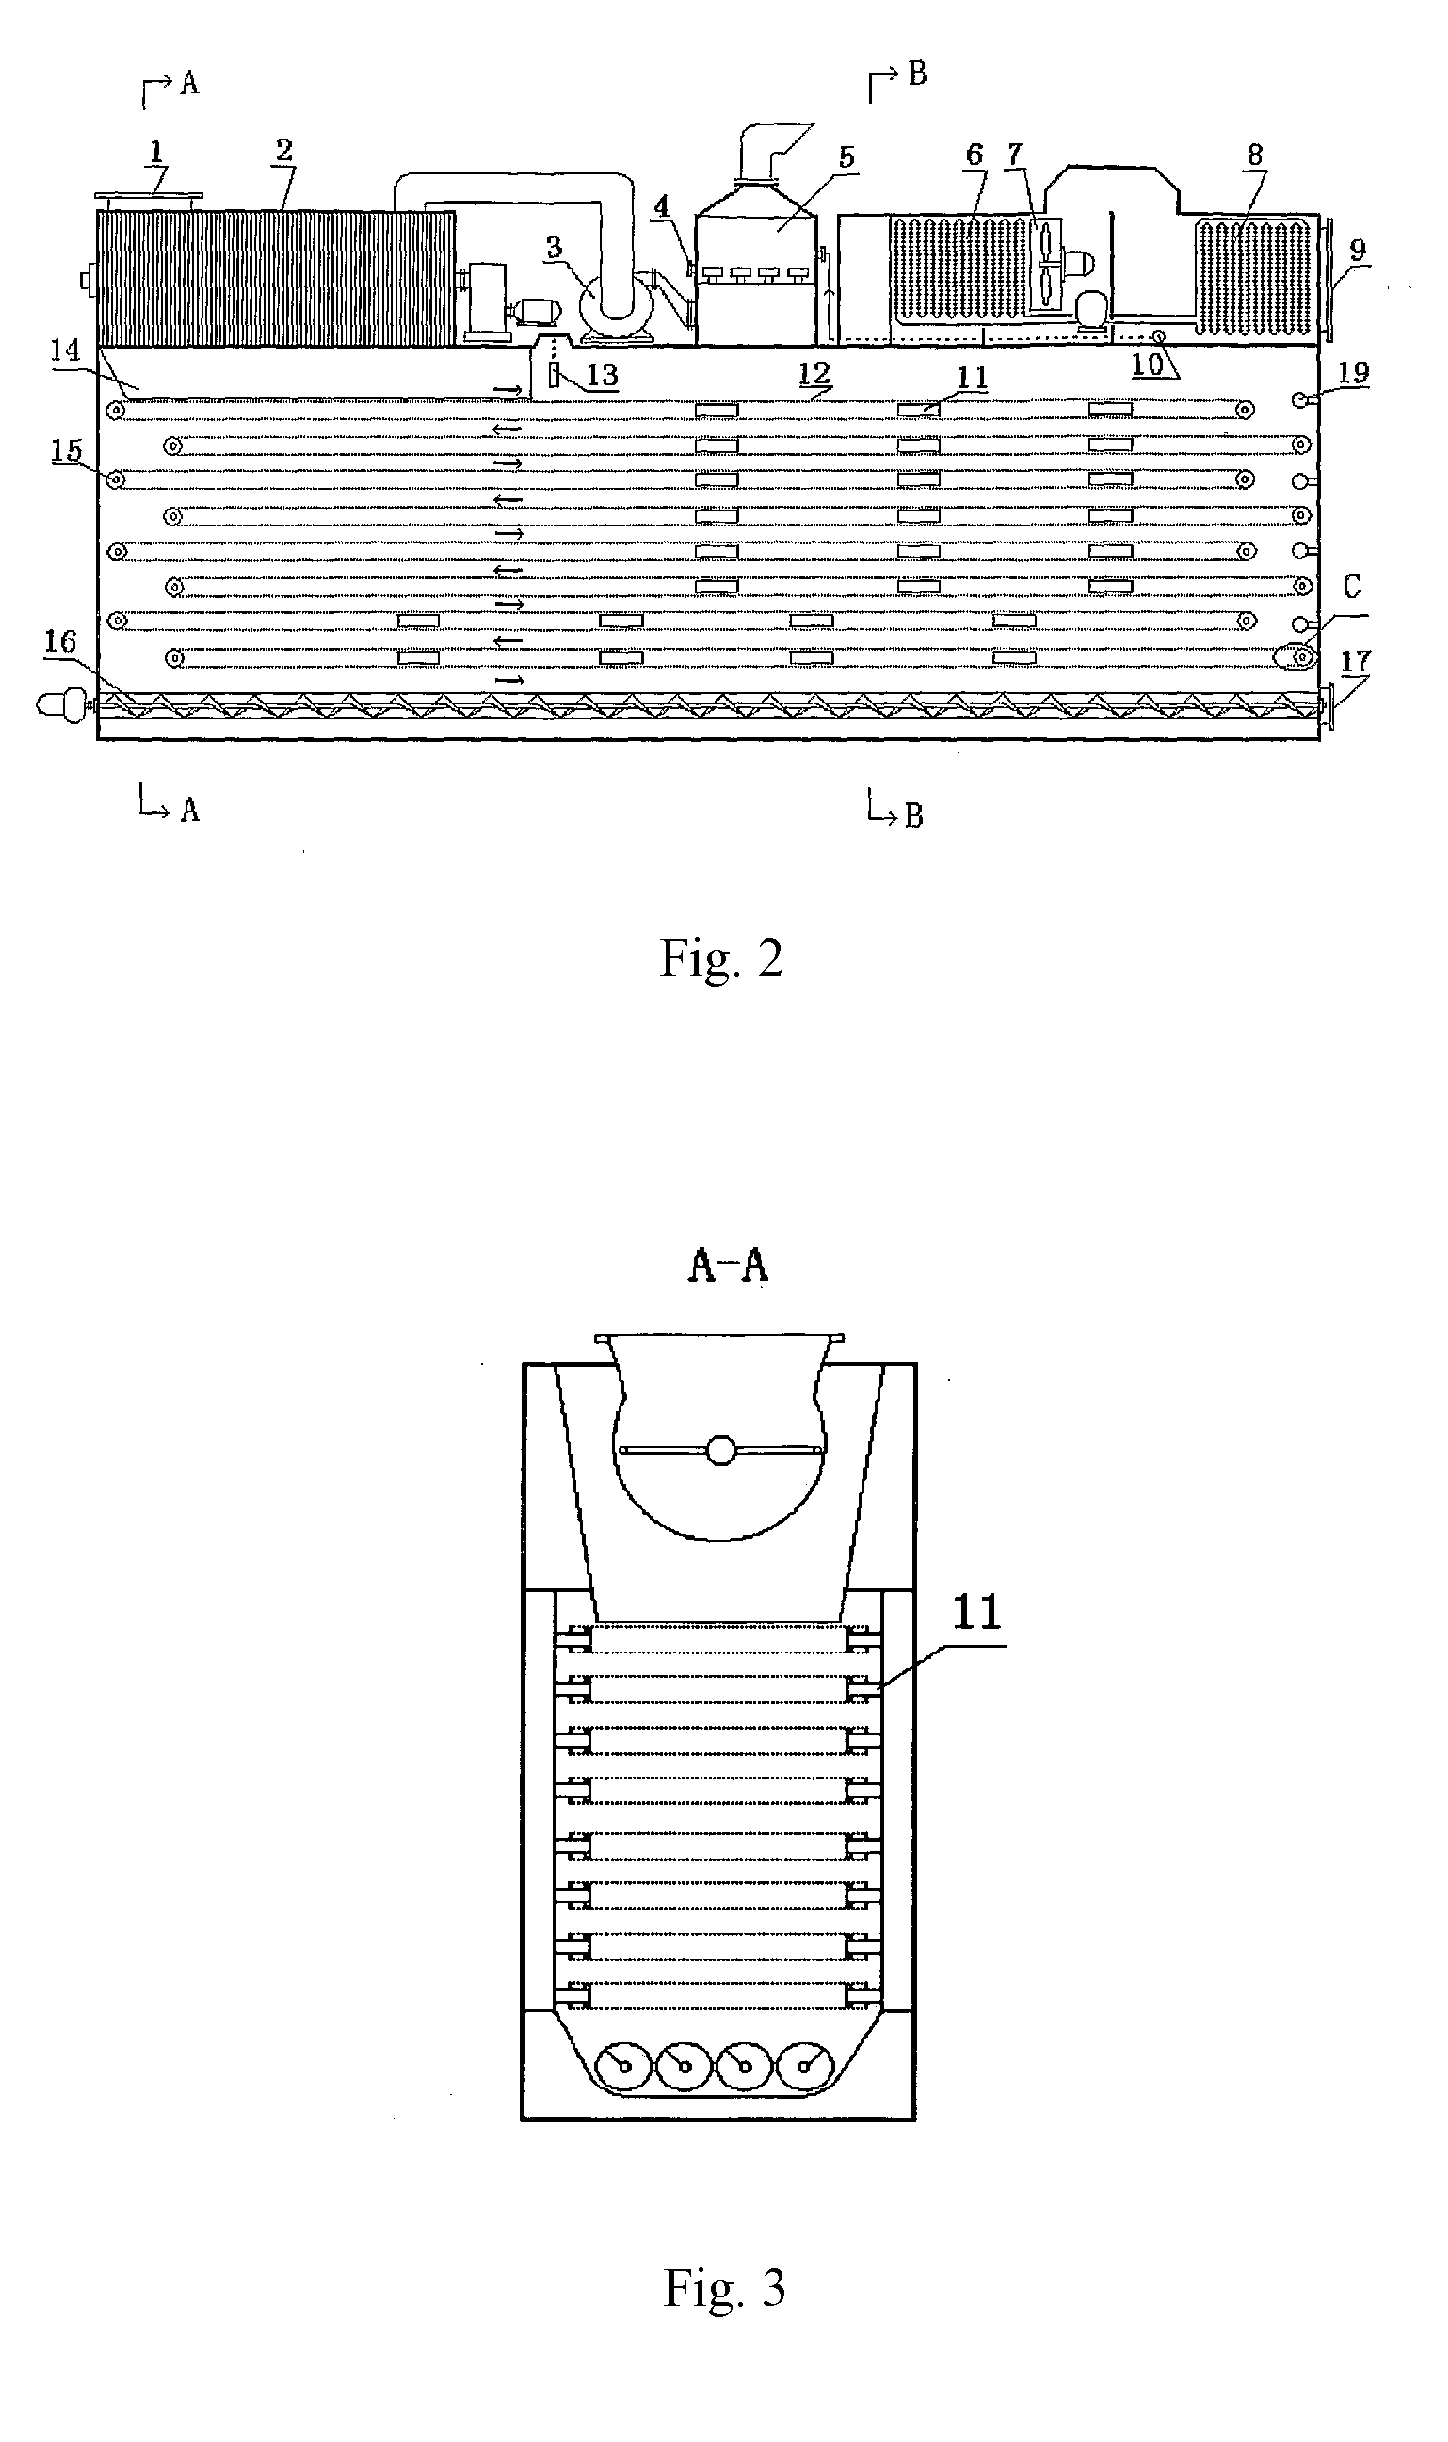 Method of Integration of Concentration-Dehydration and Aerobic Air-drying of Sewage Sludge